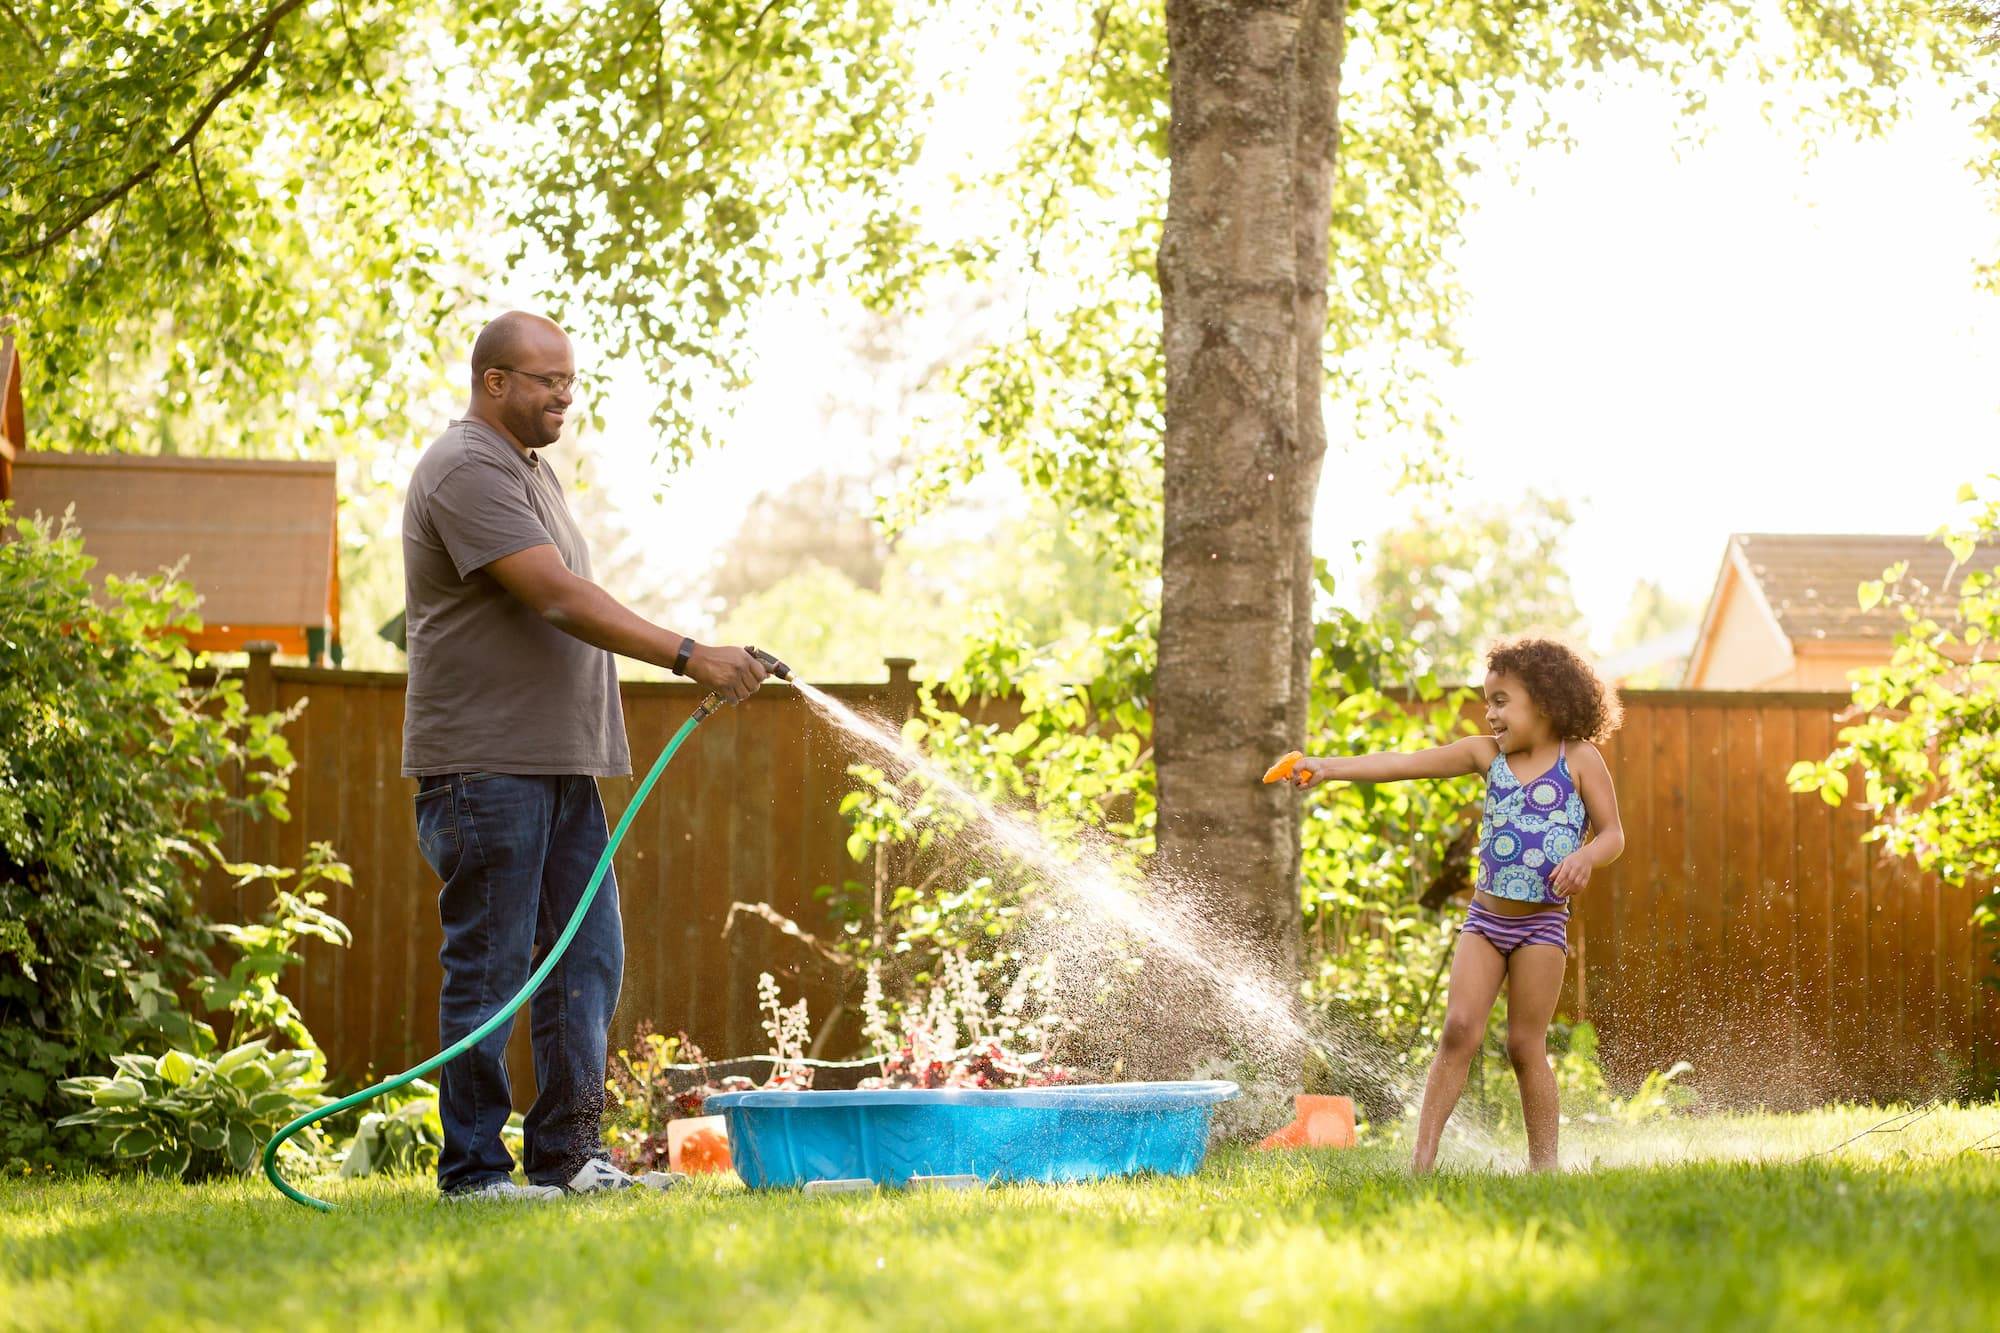 Black father and daughter have water fight in backyard. Father has a hose and daughter carries a small water pistol. Joyful summertime playful family scene.